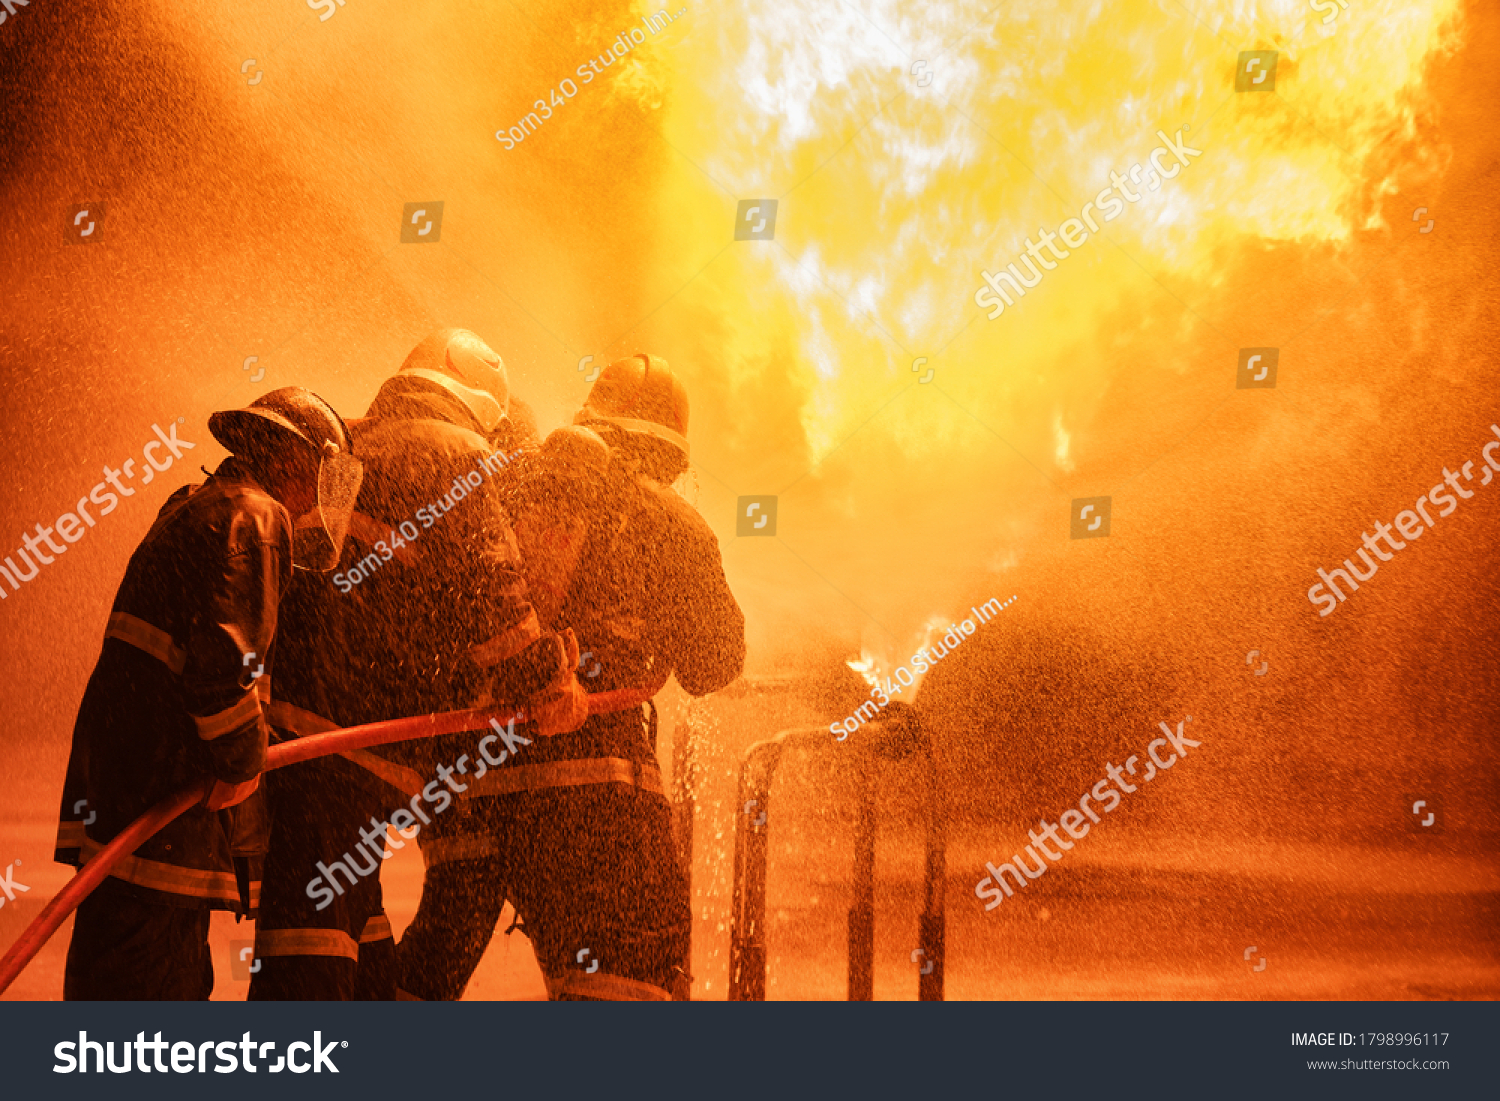 Firefighter using extinguisher or Twirl water fog type fire extinguisher to spray water from hose for fire fighting with fire flame on fuel and control fire for safety in plant of industrial area. #1798996117